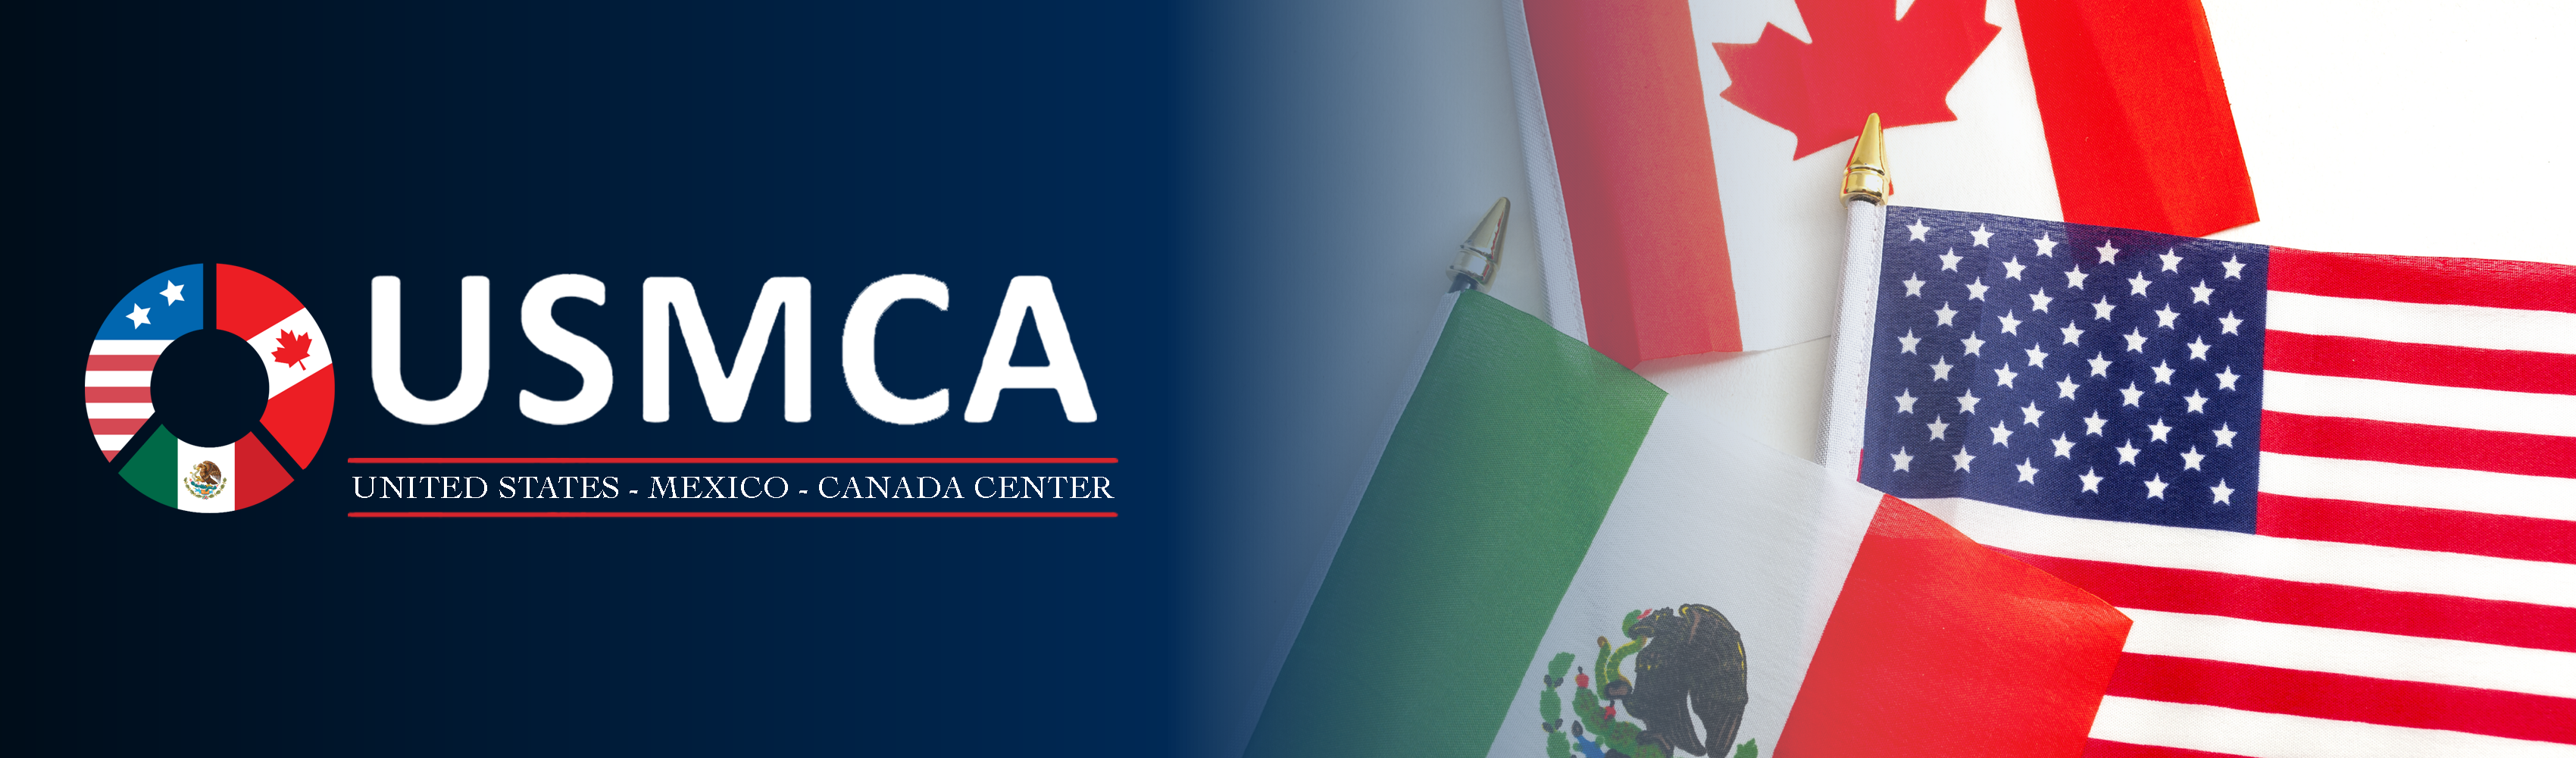 The U.S. – Mexico – Canada Agreement (USMCA) is a pending trade agreement that will replace the North American Free Trade Agreement (NAFTA). Image links to cbp.gov.